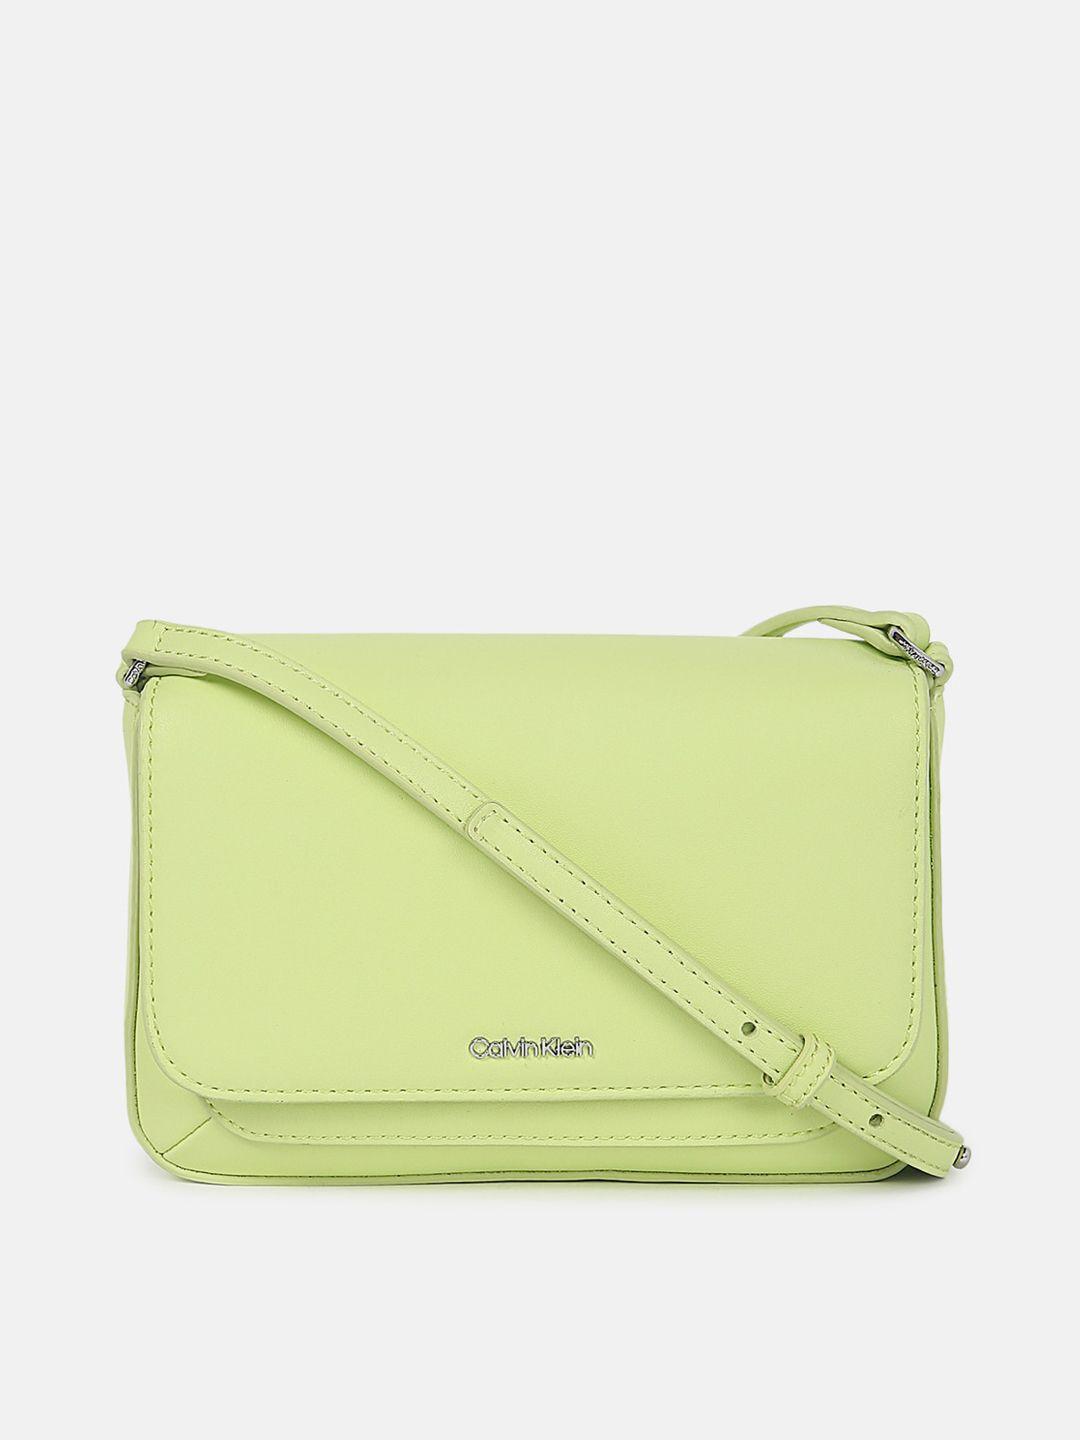 calvin-klein-jeans-one-compartment-small-structured-sling-bag